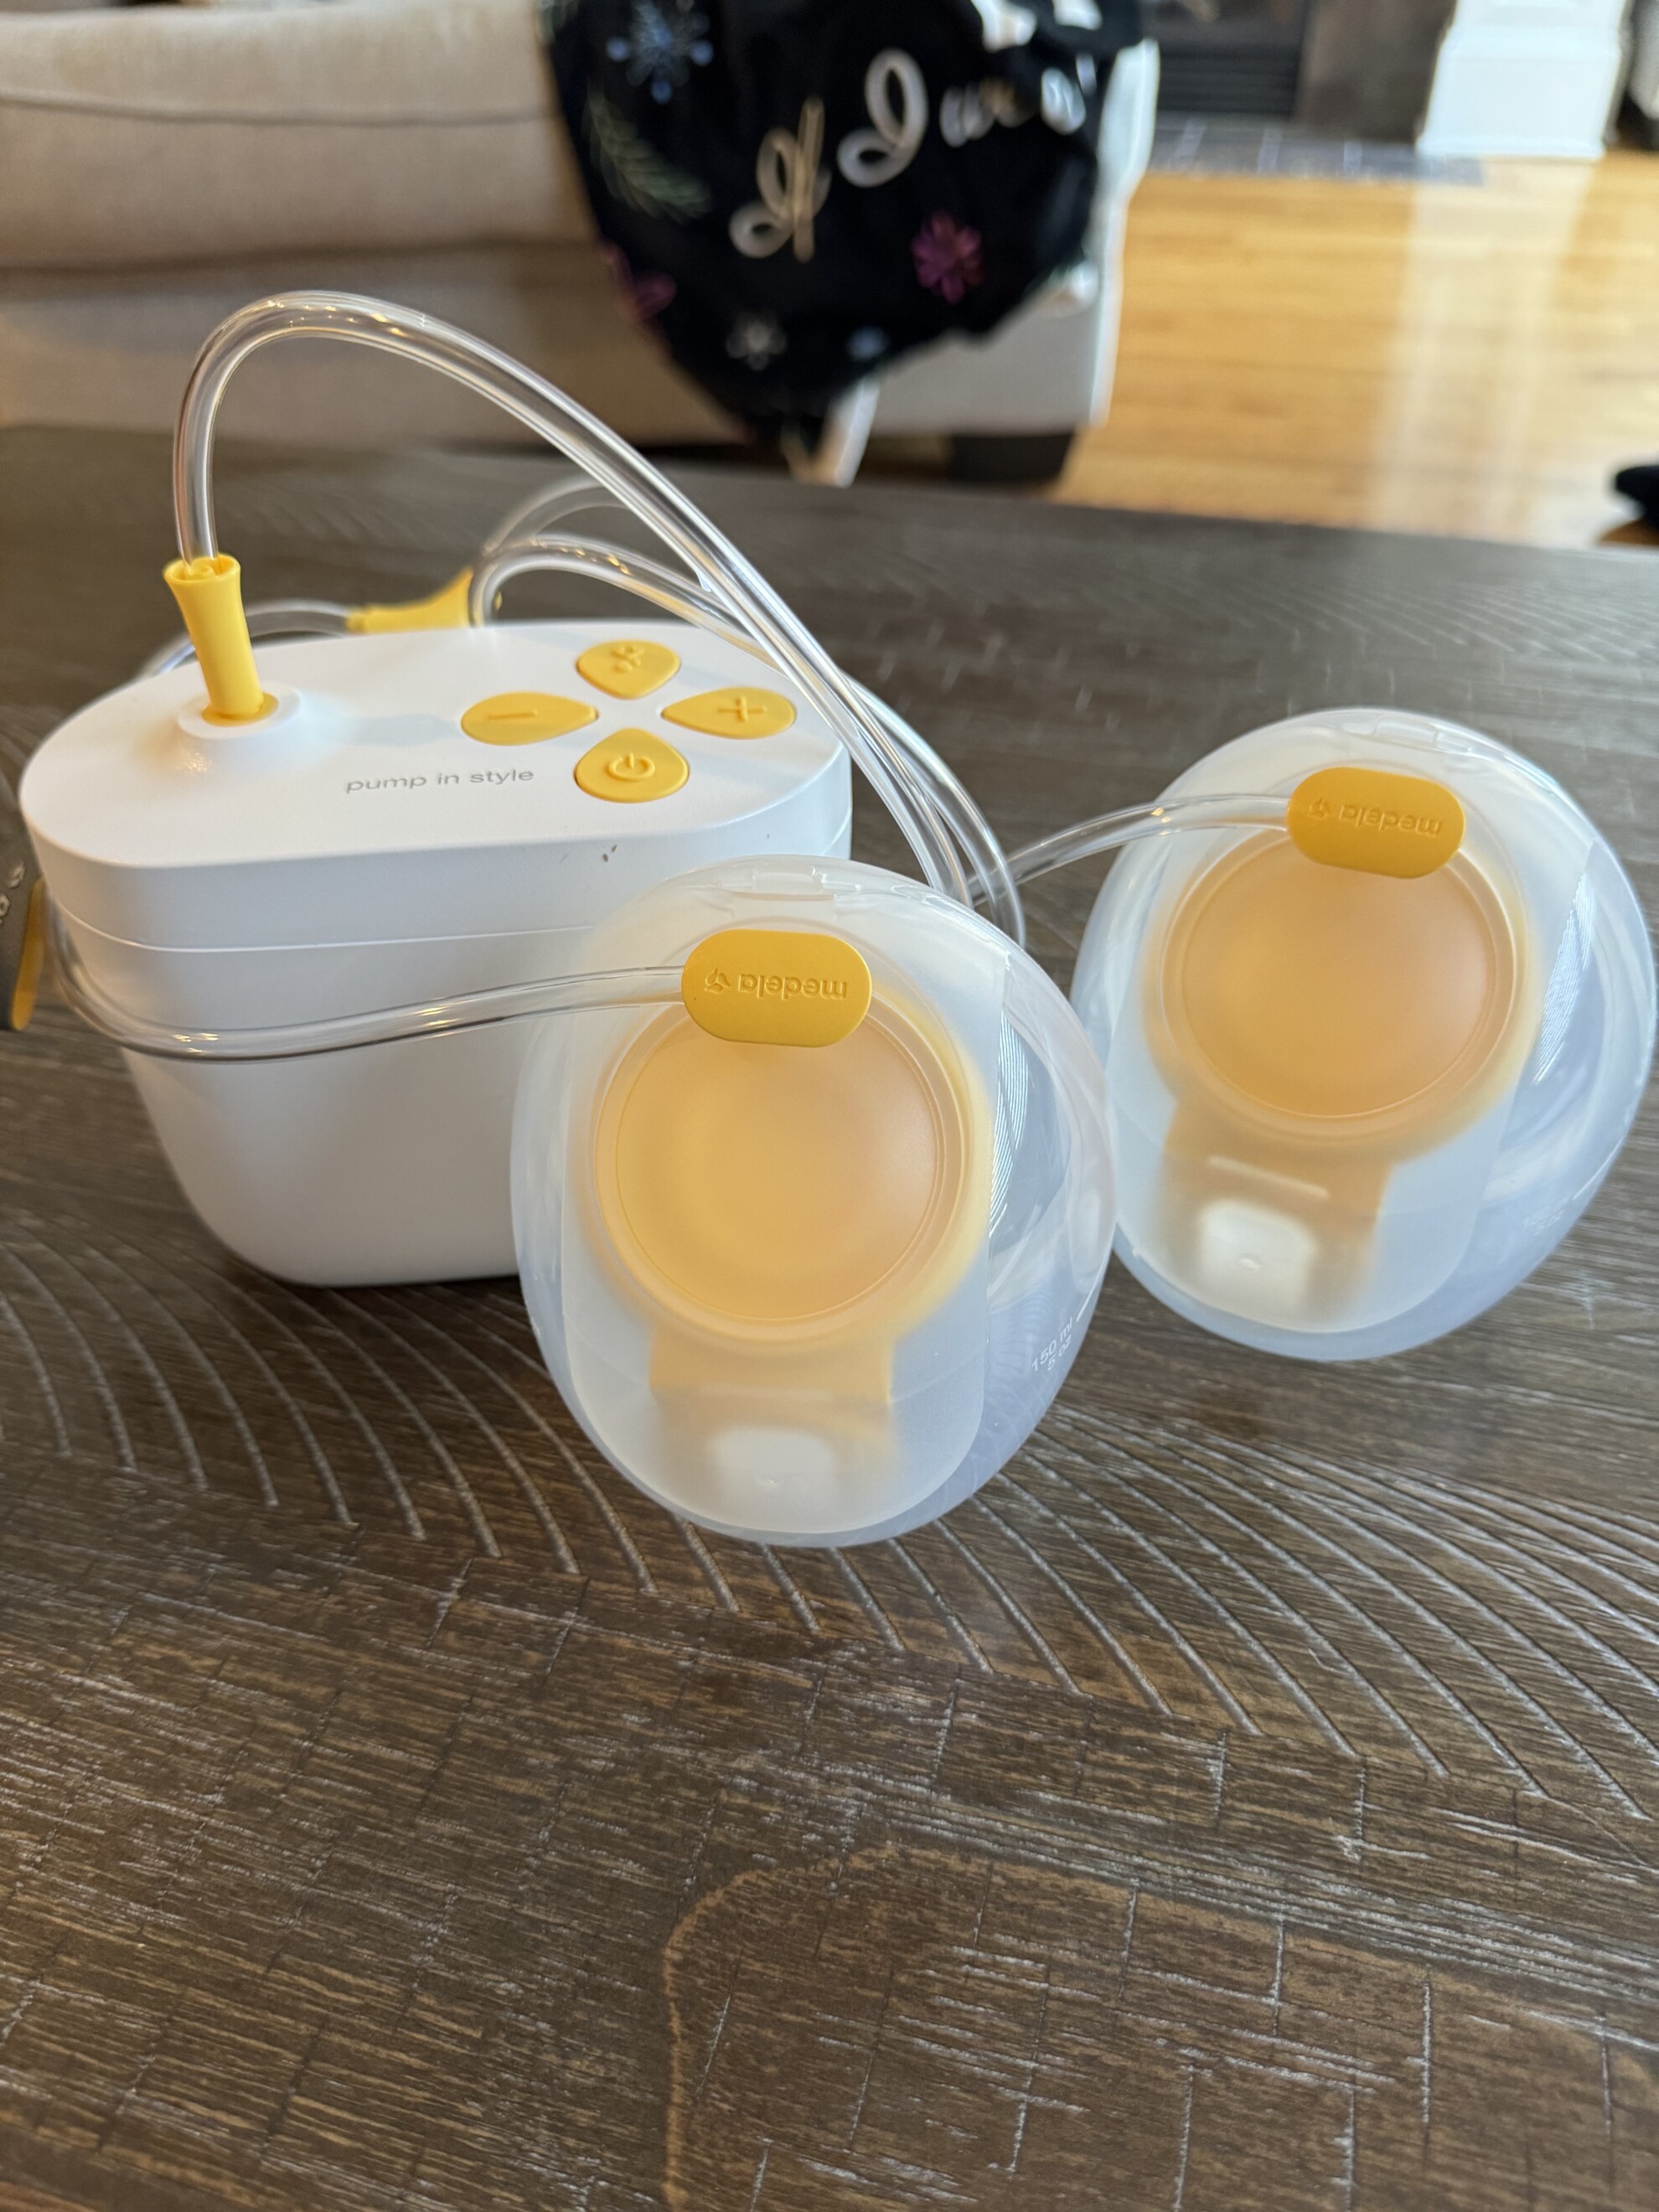 Medela Hands-Free Collection Cups